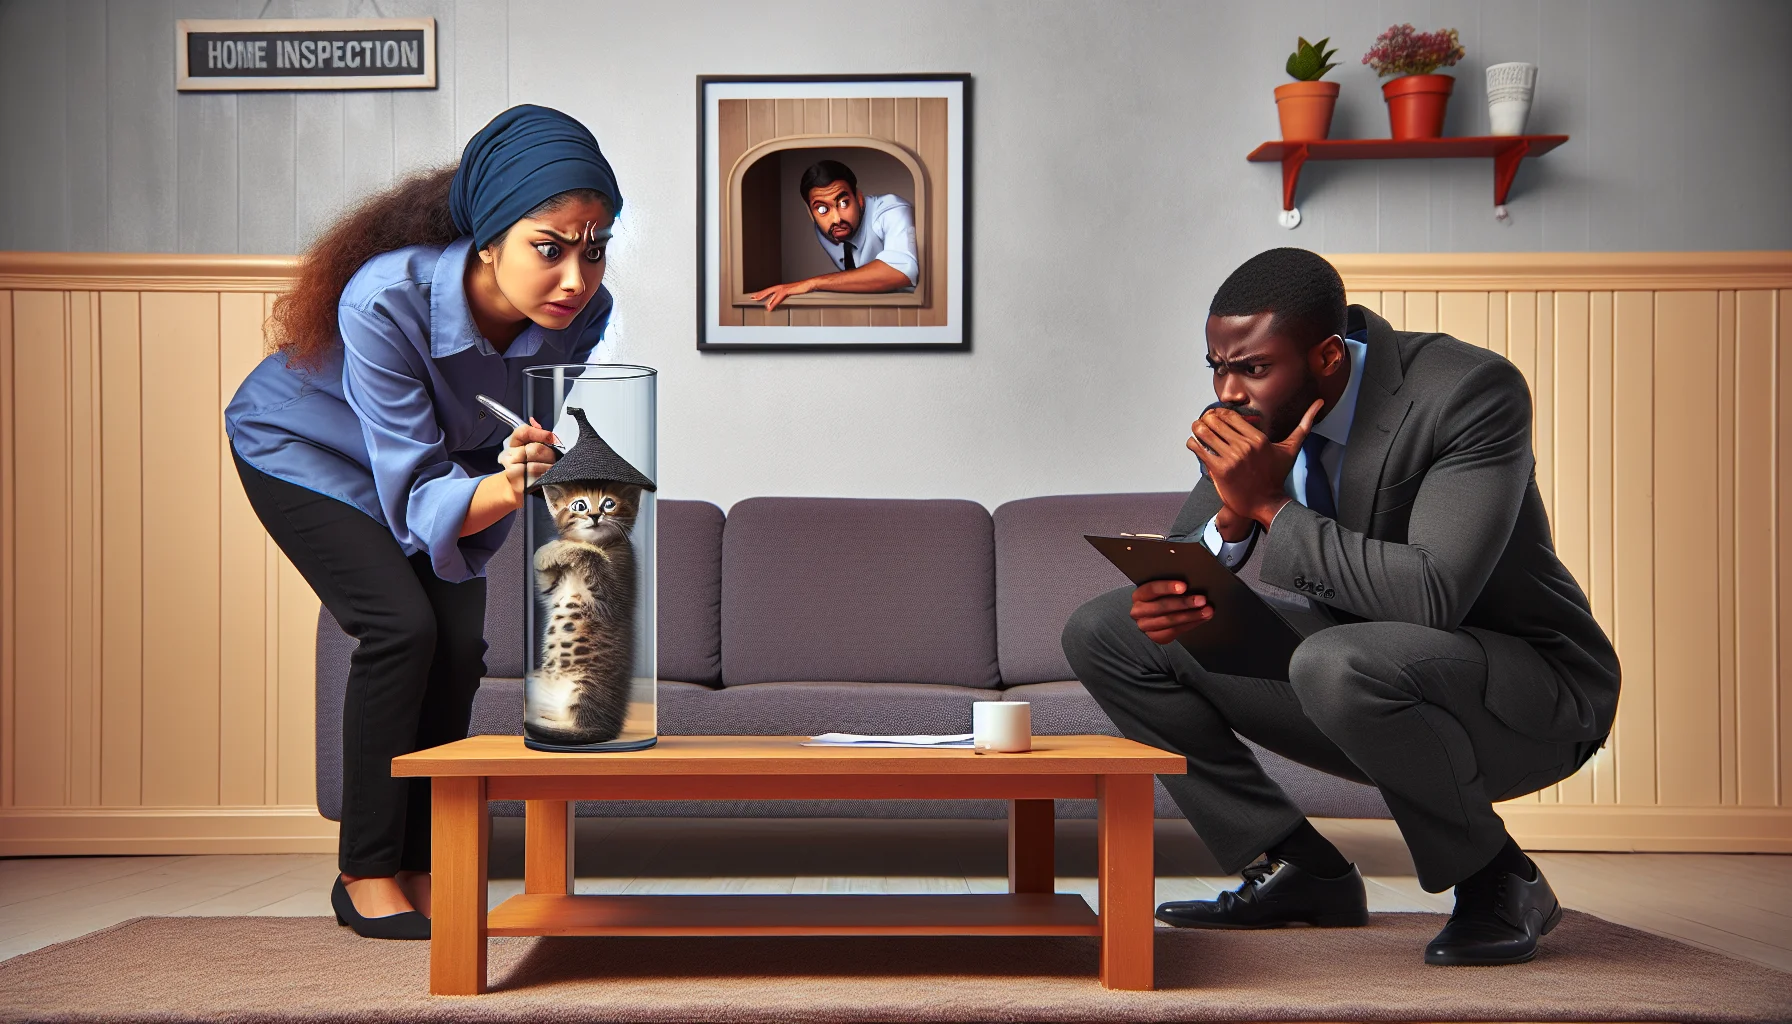 Create an amusing and realistic image of a clever scenario about passing a home inspection. Picture a living room, where the homeowner, a South Asian woman, nervously attempts to hide a playful kitten within a transparent vase on the coffee table. A Black man, the focused home inspector, is scrutinizing a wall, completely oblivious to the kitten's tall hat sticking out of the vase. The room should be filled with multiple secret hiding spots with household objects organized in unlikely manners to add layers of humor.